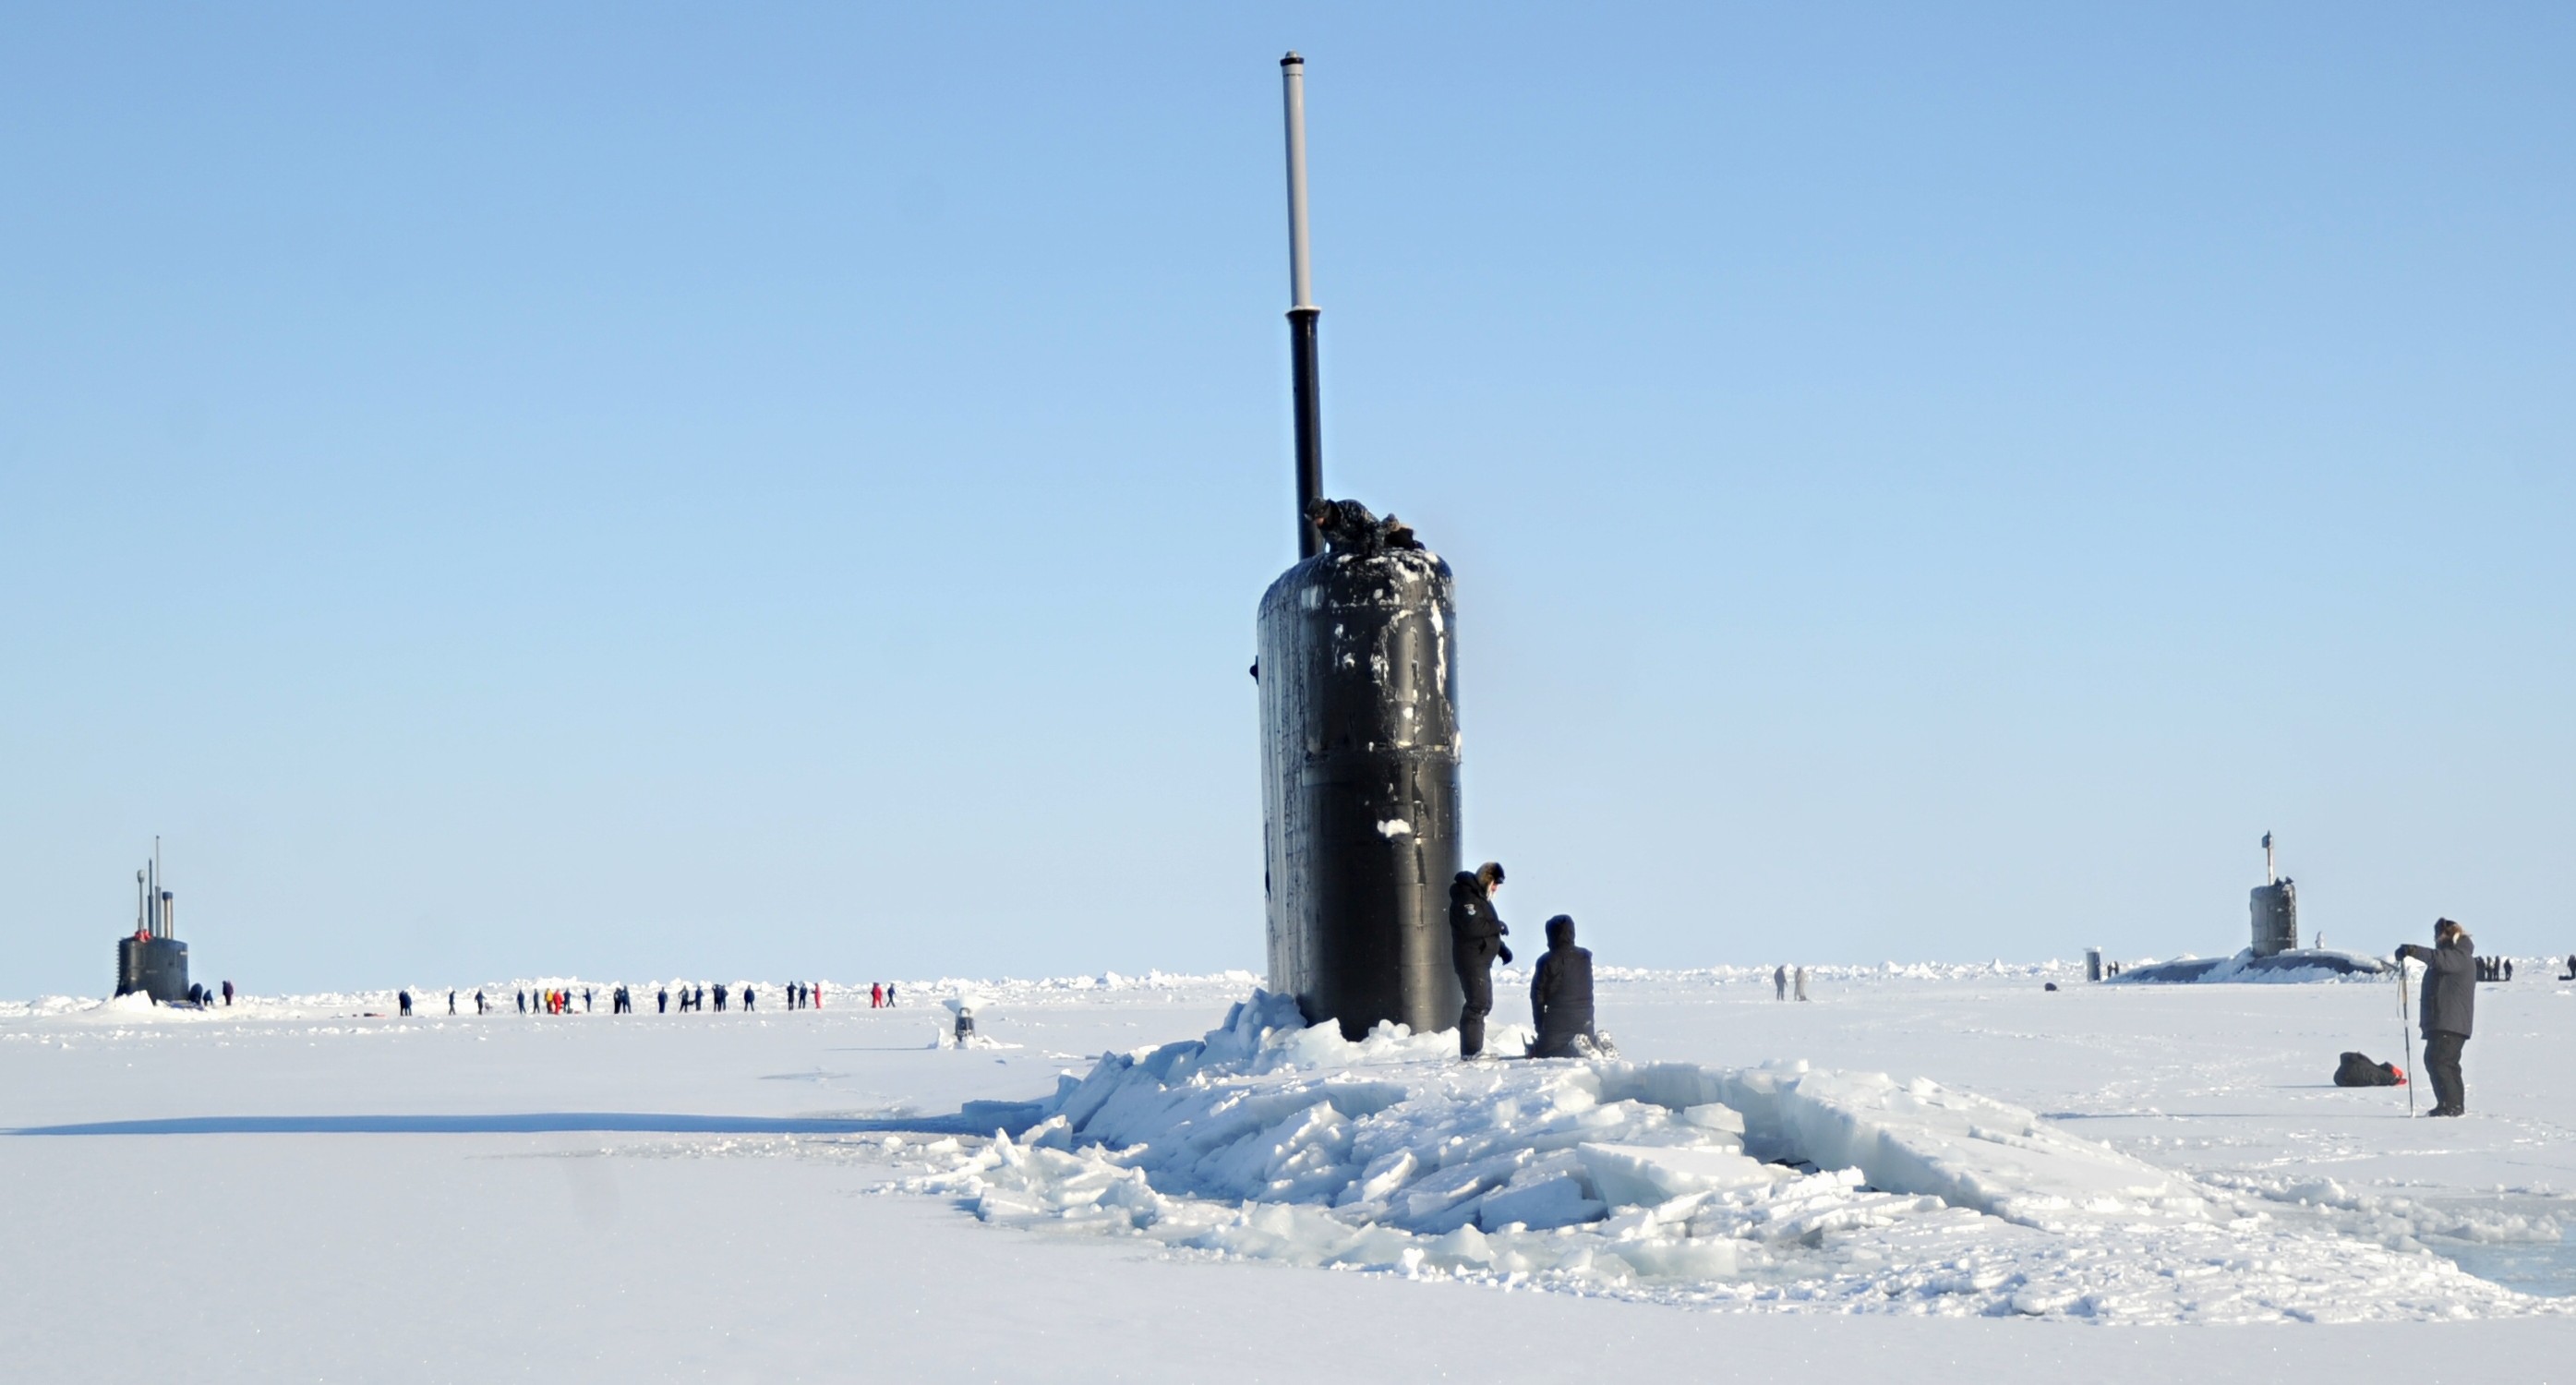 ssn-22 uss connecticut seawolf class attack submarine us navy exercise icex 18 arctic ocean 40 hms trenchant s-91